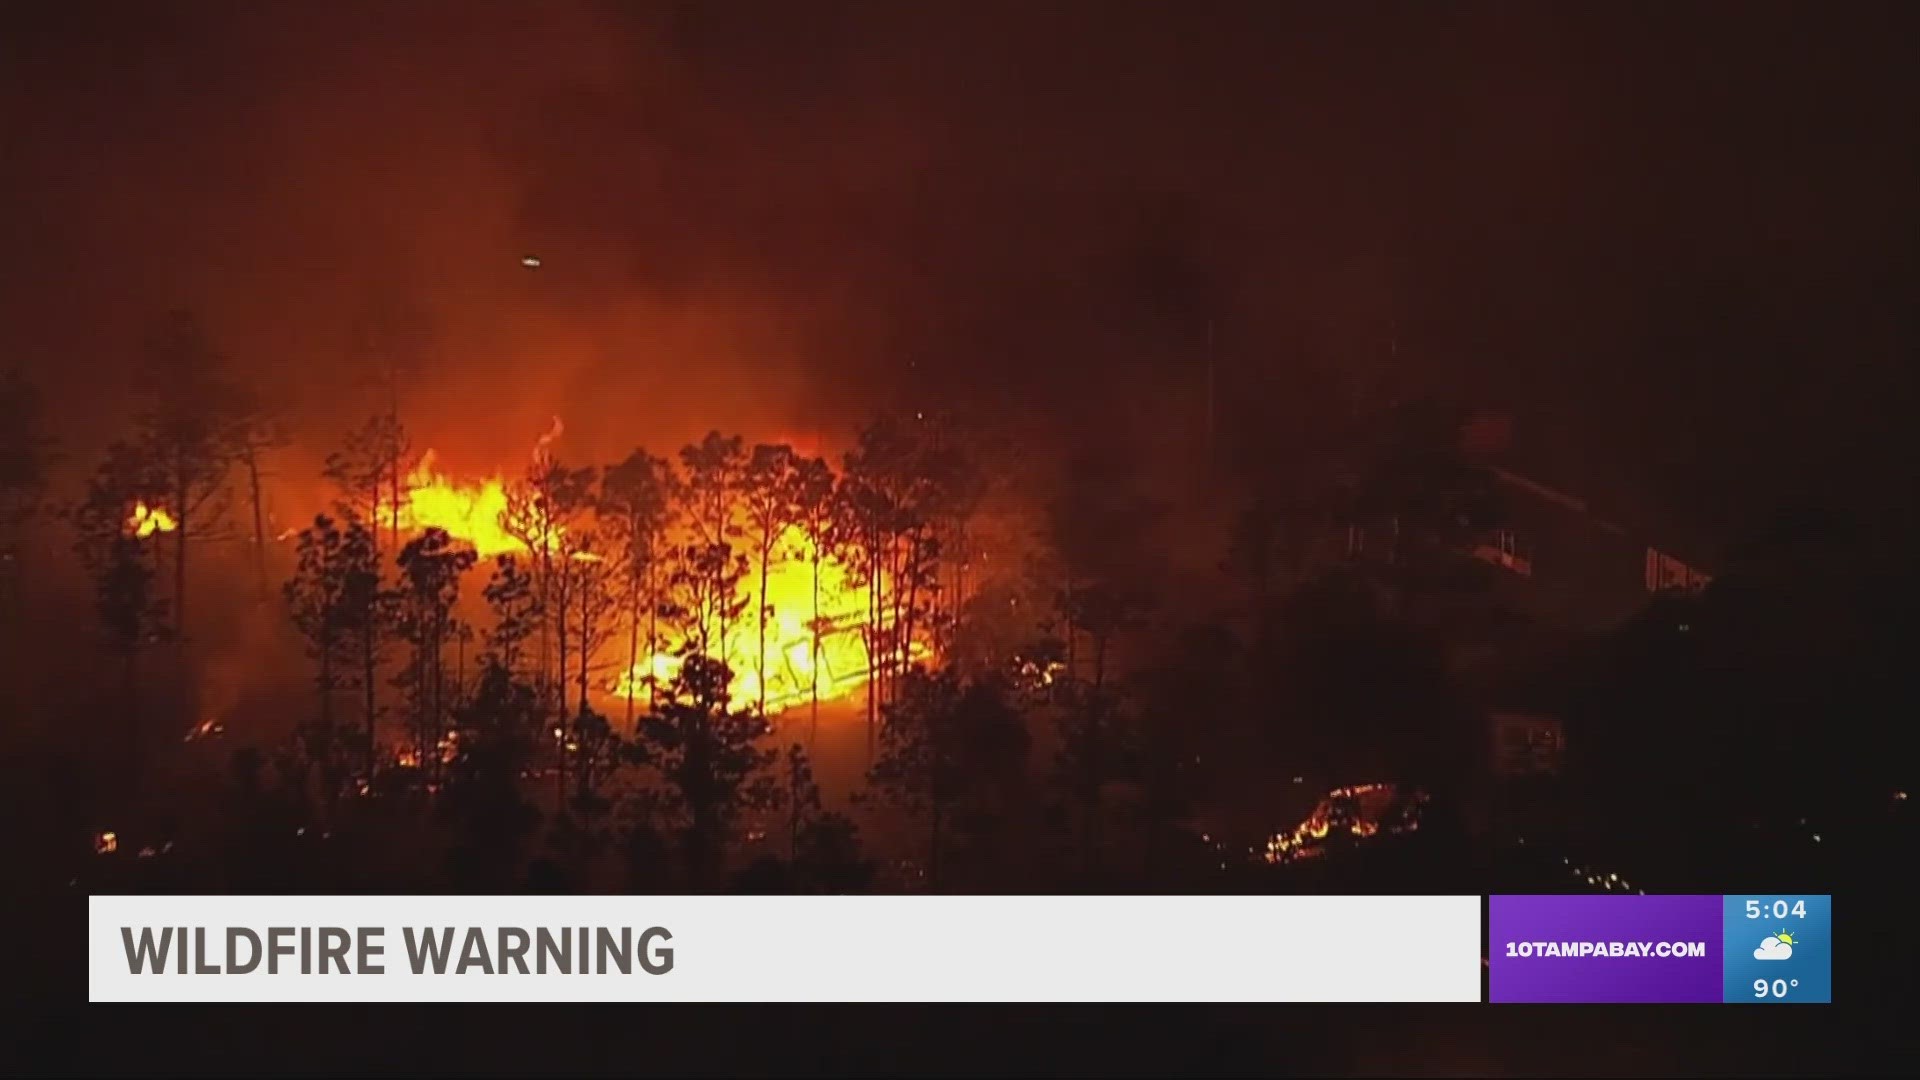 An "extreme" drought exists in Southwest Florida, where the wildfire risk is the highest.